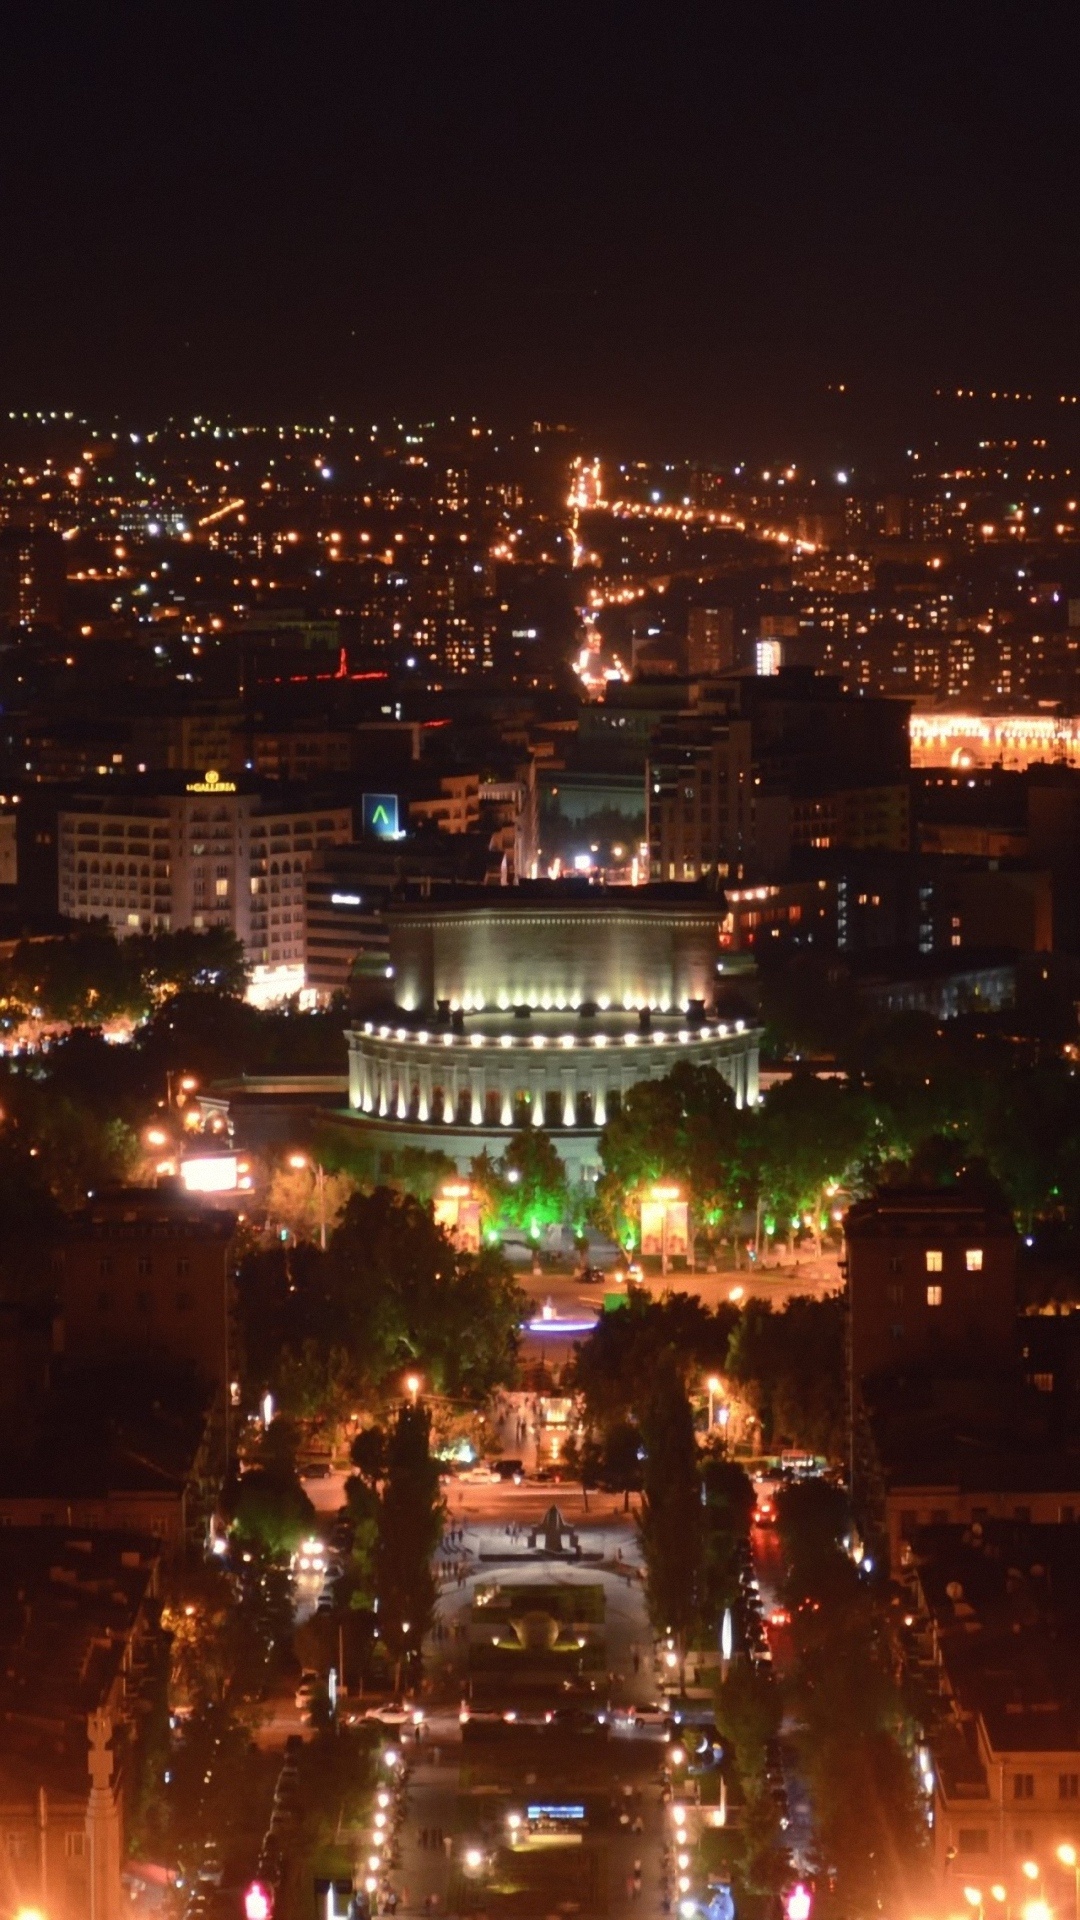 Armenia: One of the world's oldest continuously inhabited cities, Capital. 1080x1920 Full HD Wallpaper.